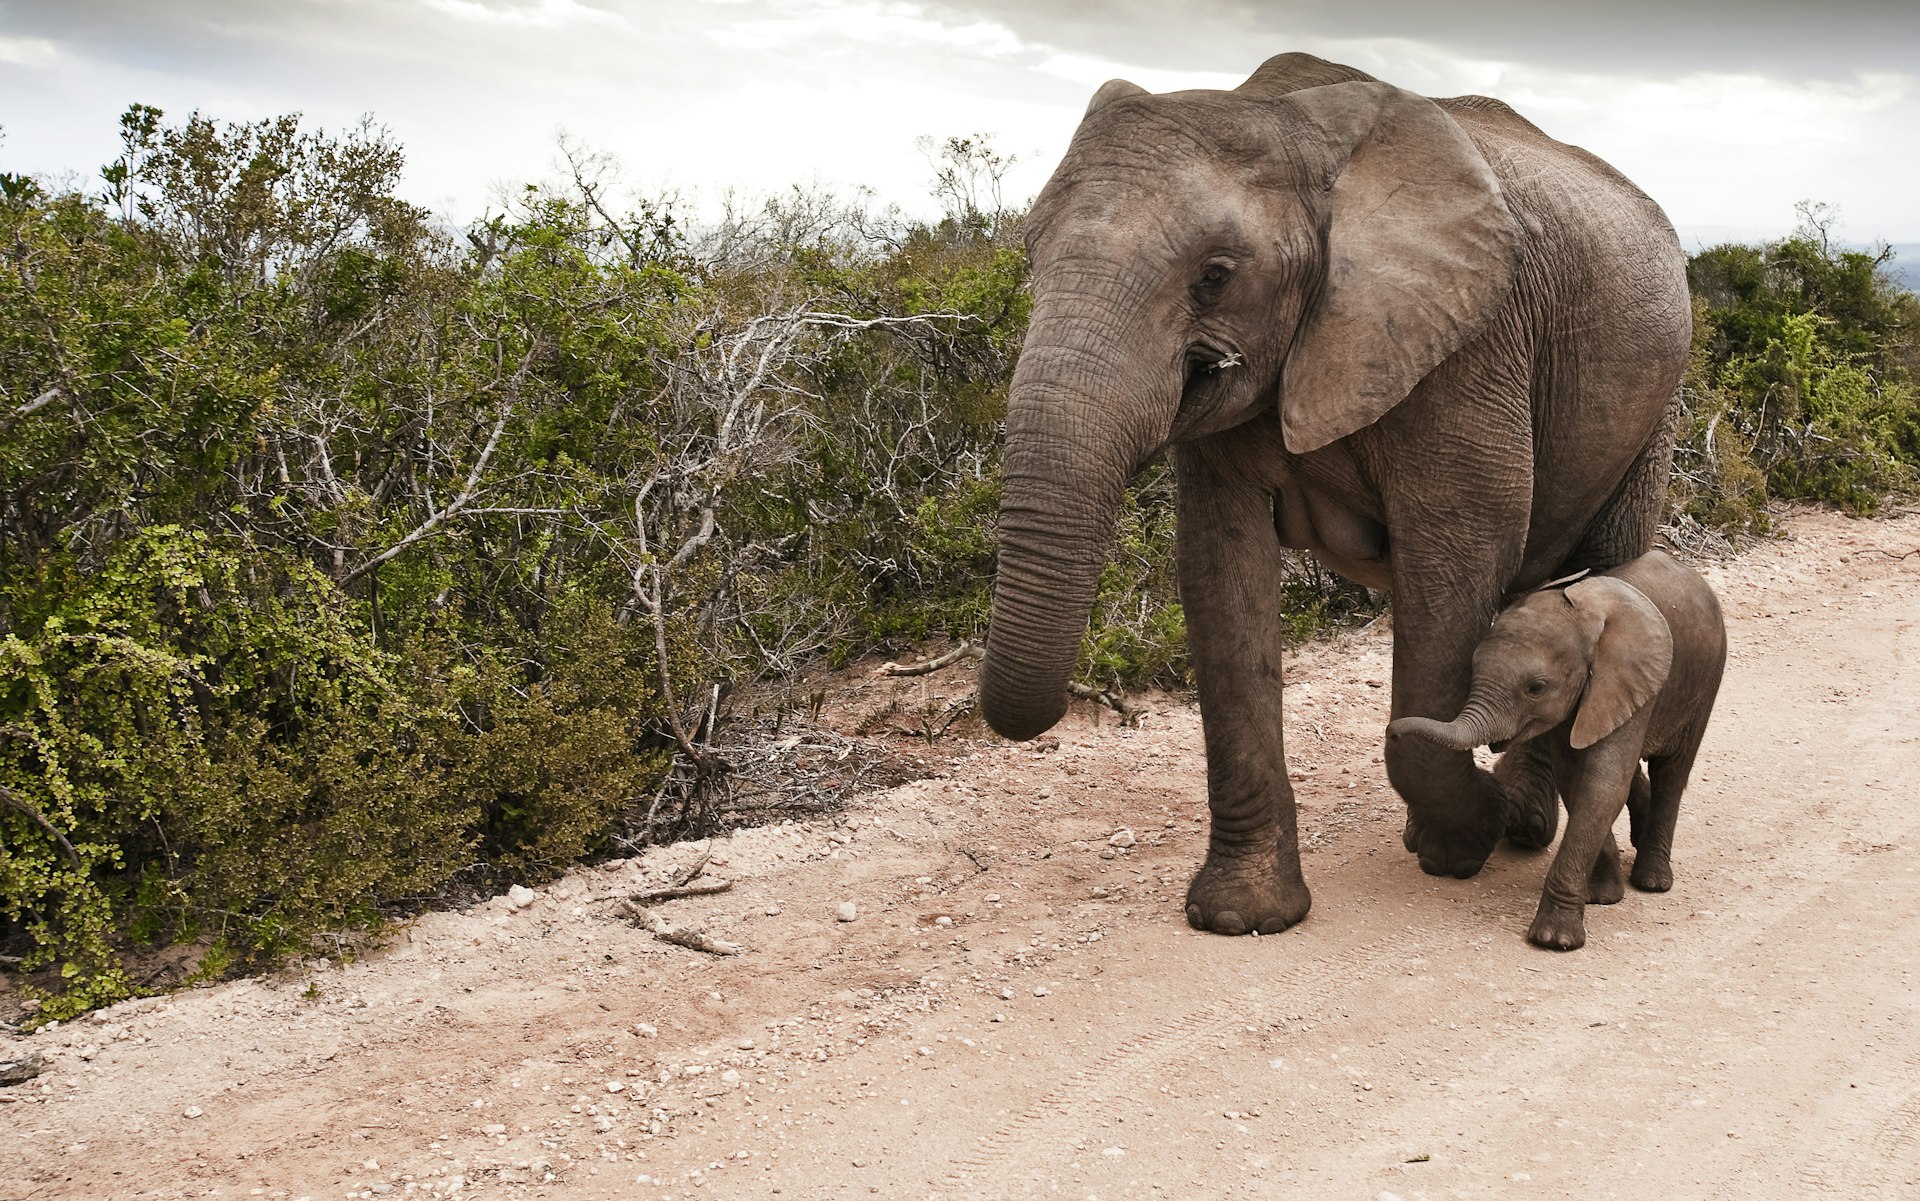 Elephant cow and calf walking on gravel road in Addo Elephant National Park, South Africa